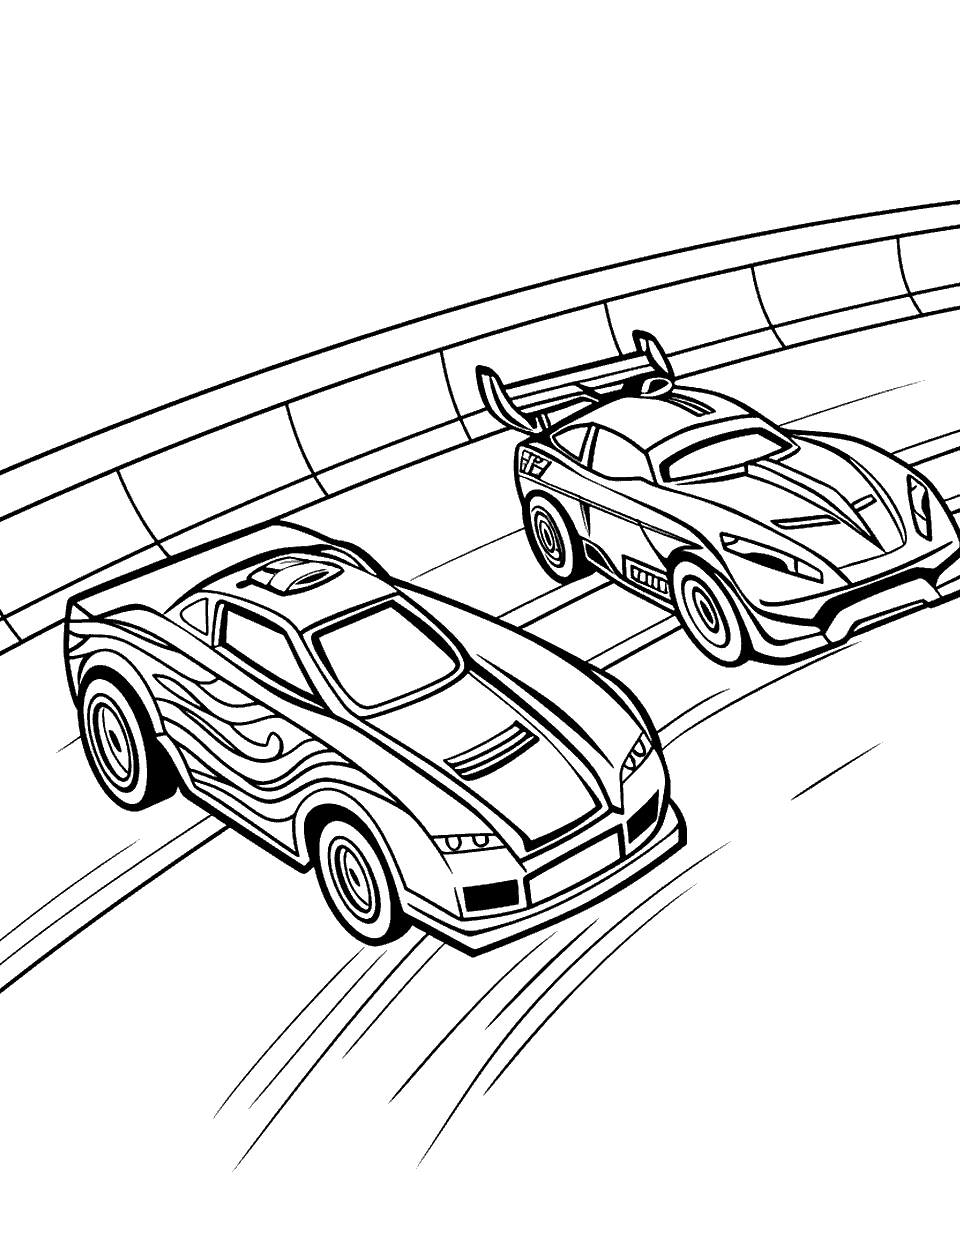 30 Hot Wheels Coloring Pages: Free Printable Sheets